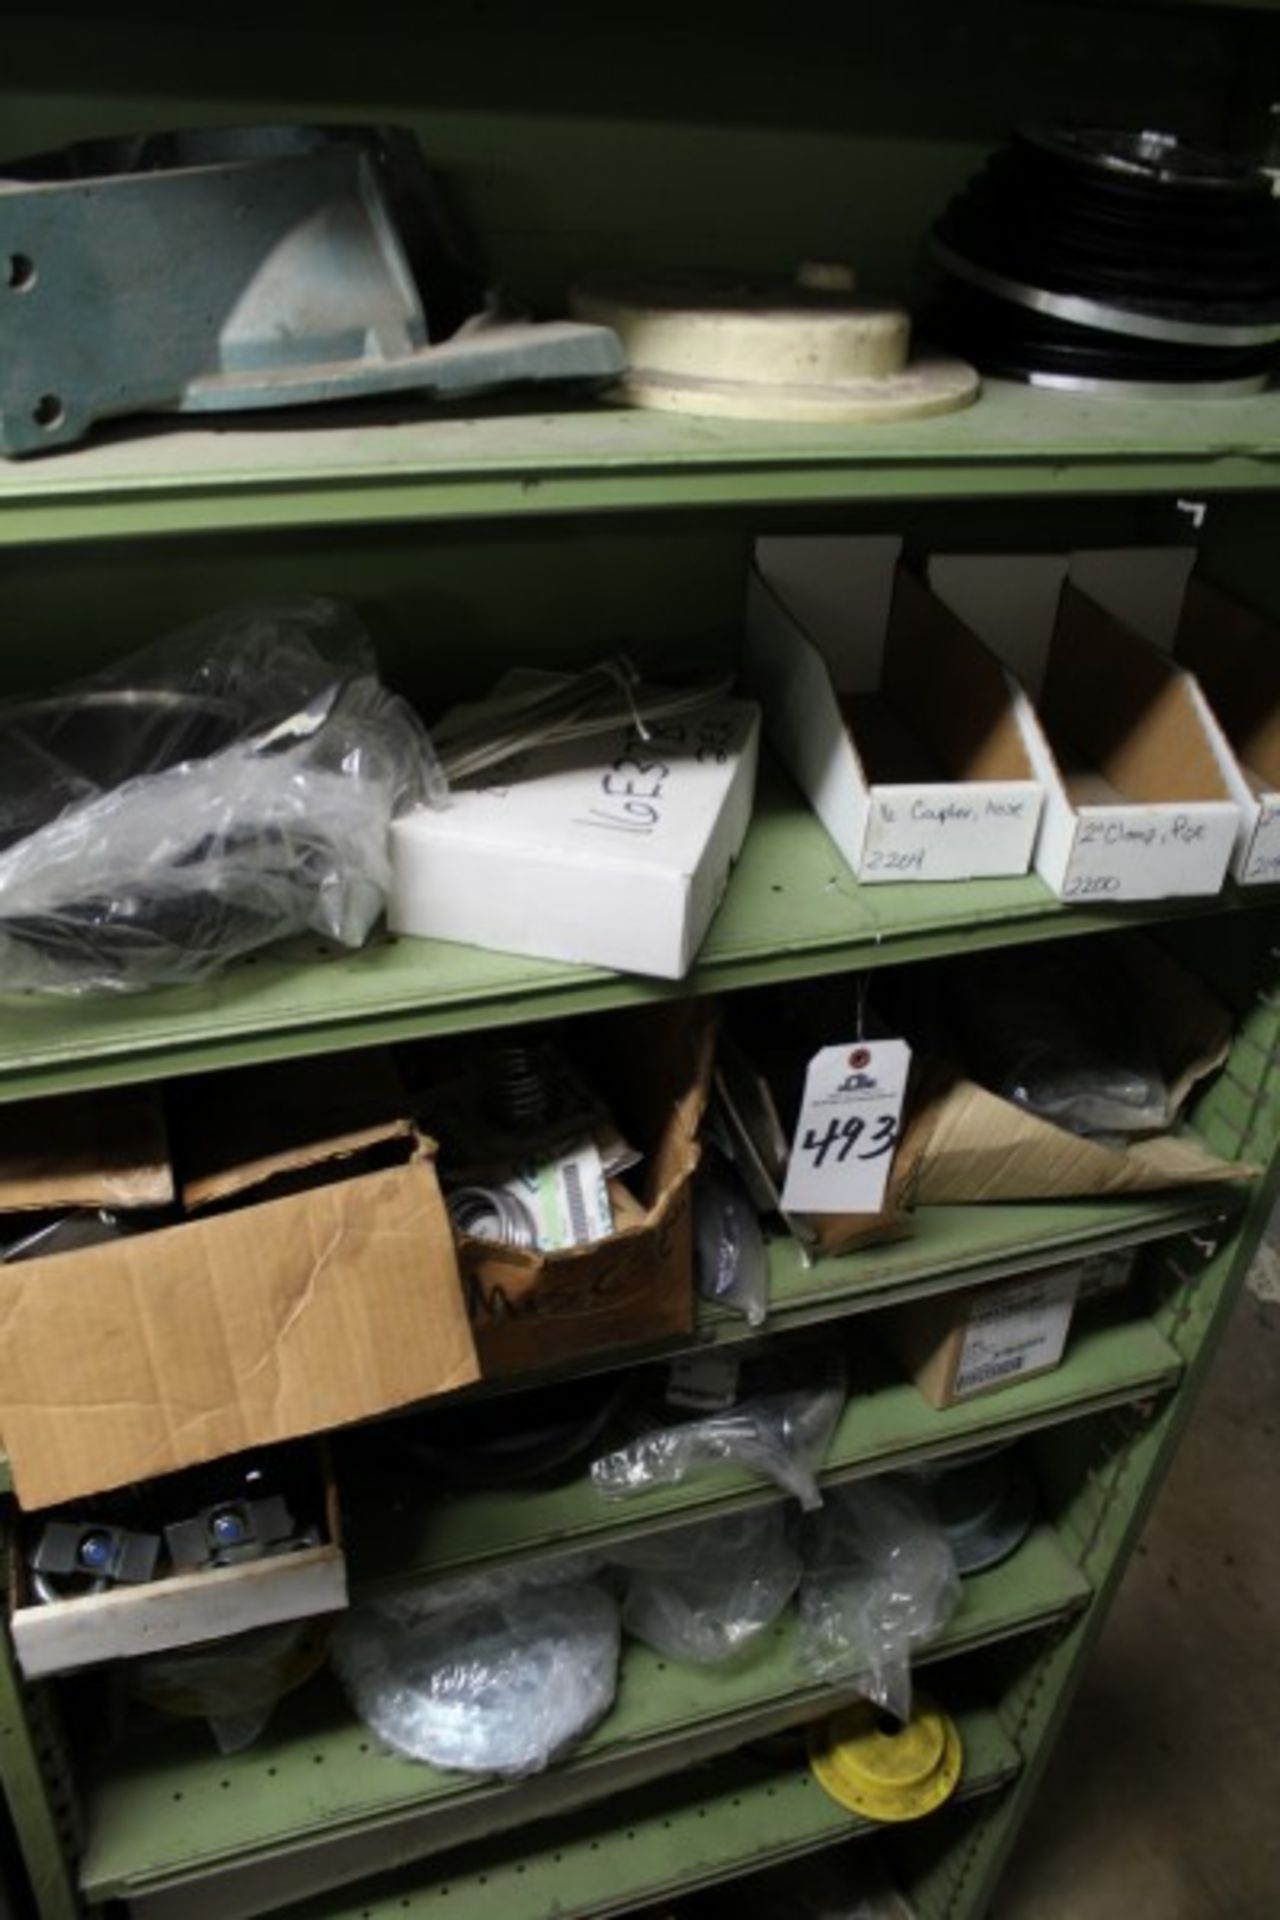 SUBJECT TO BULK BID OF LOT 463A: Contents of Storage Shelf Section, Spare Machine Parts, (not to